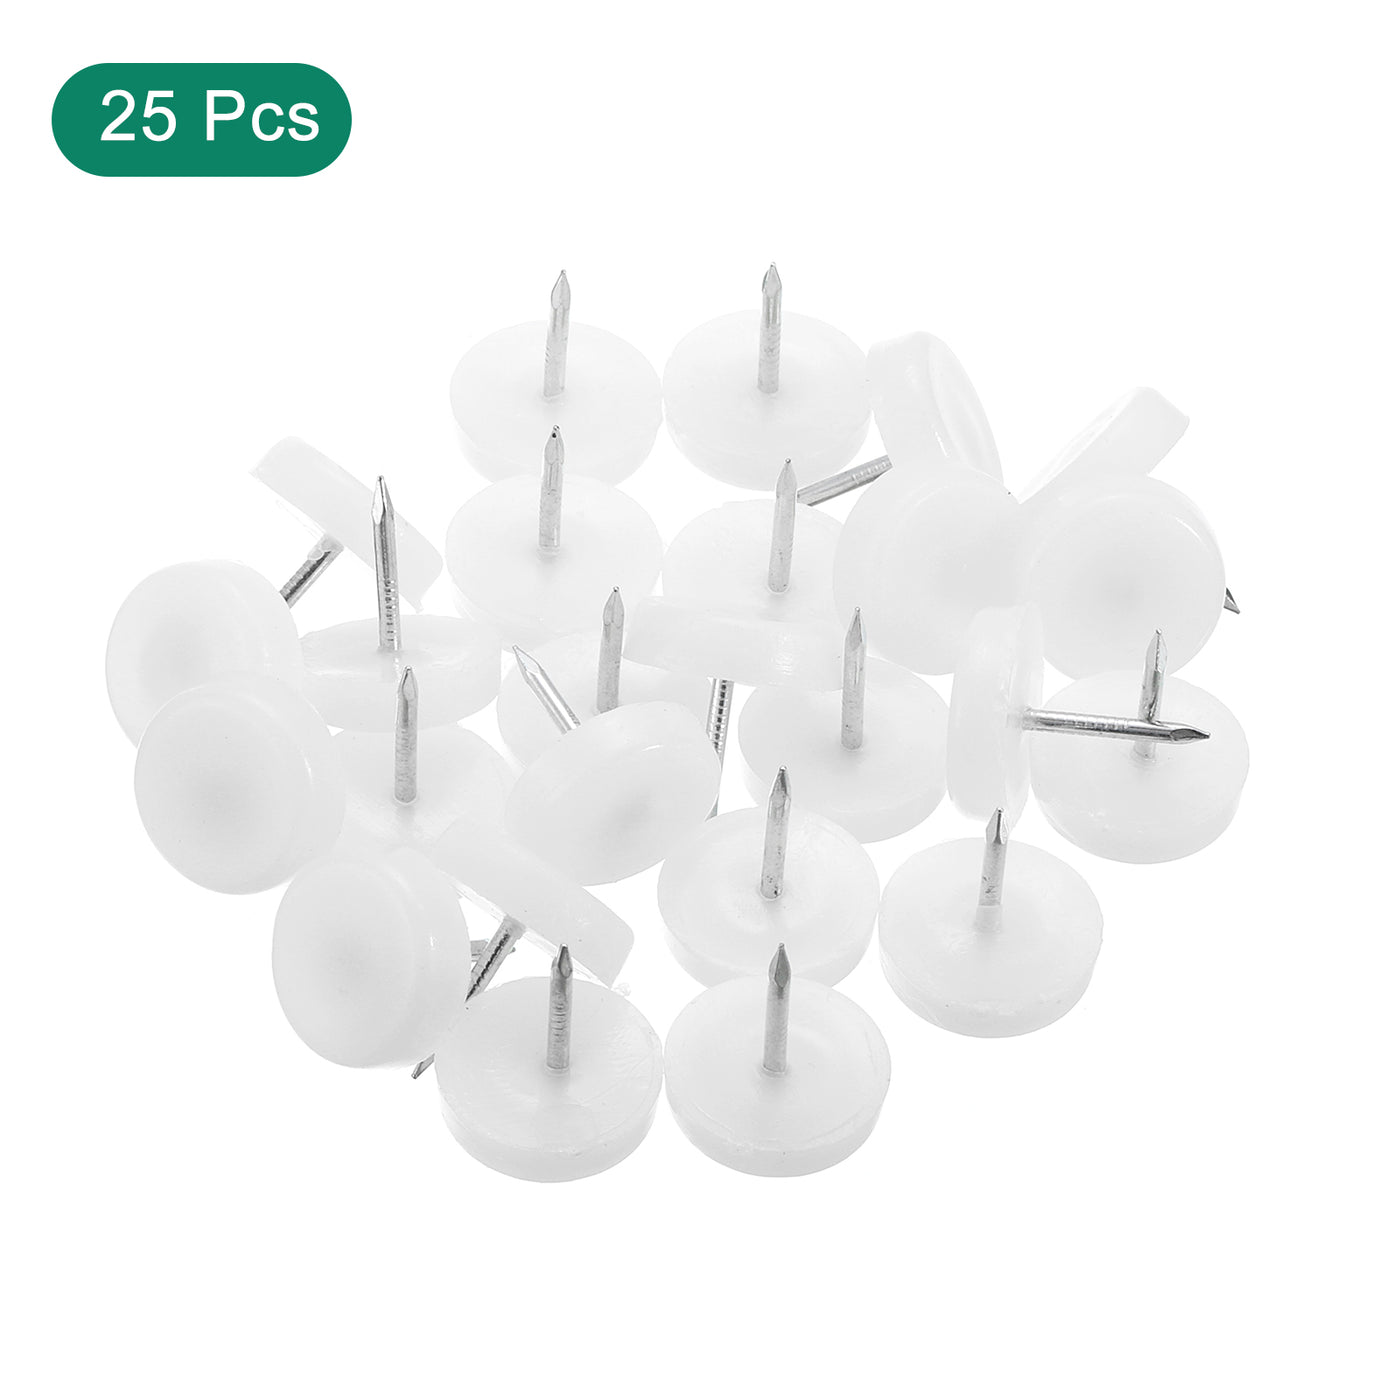 uxcell Uxcell Nail on Furniture Glides, 25pcs 19mm Plastic Furniture Feet Sliders, White